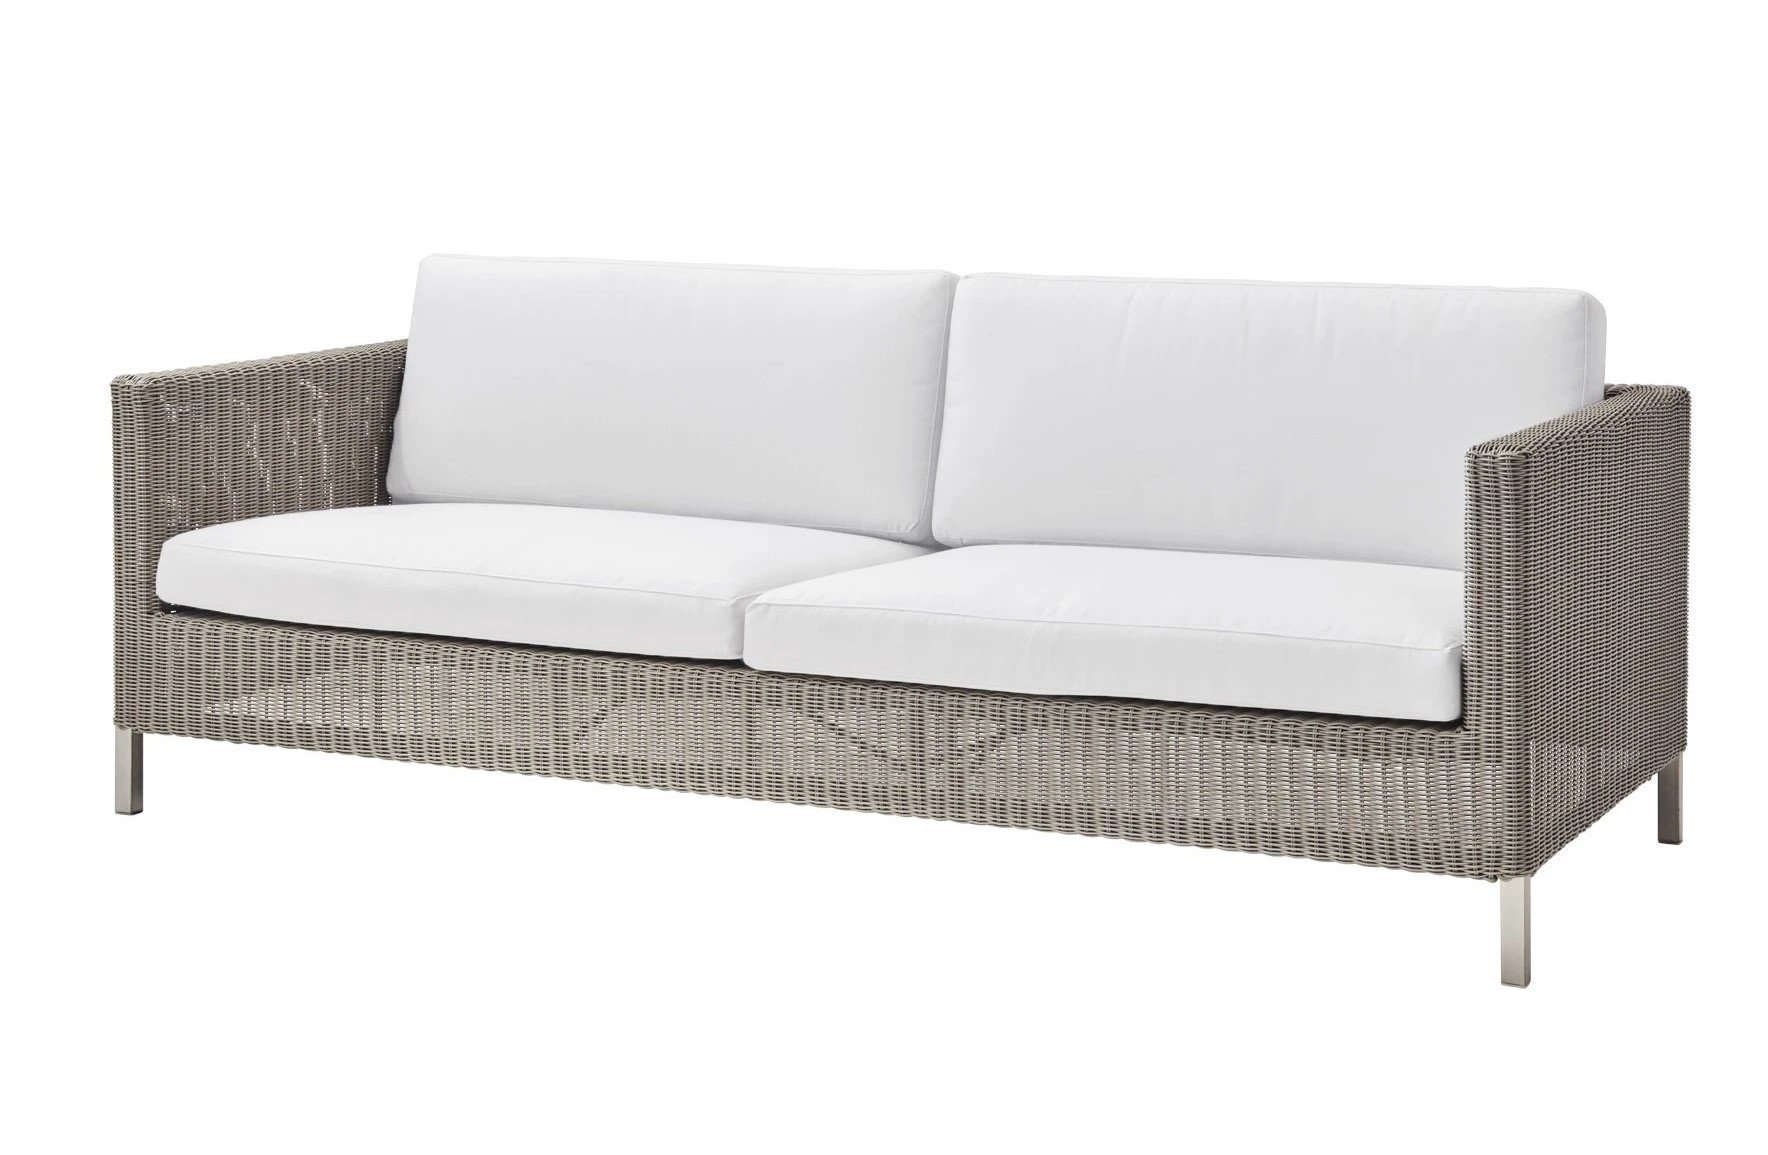 Connect 3-seat Modular Sofa from Cane-line, designed by Cane-line Design Team